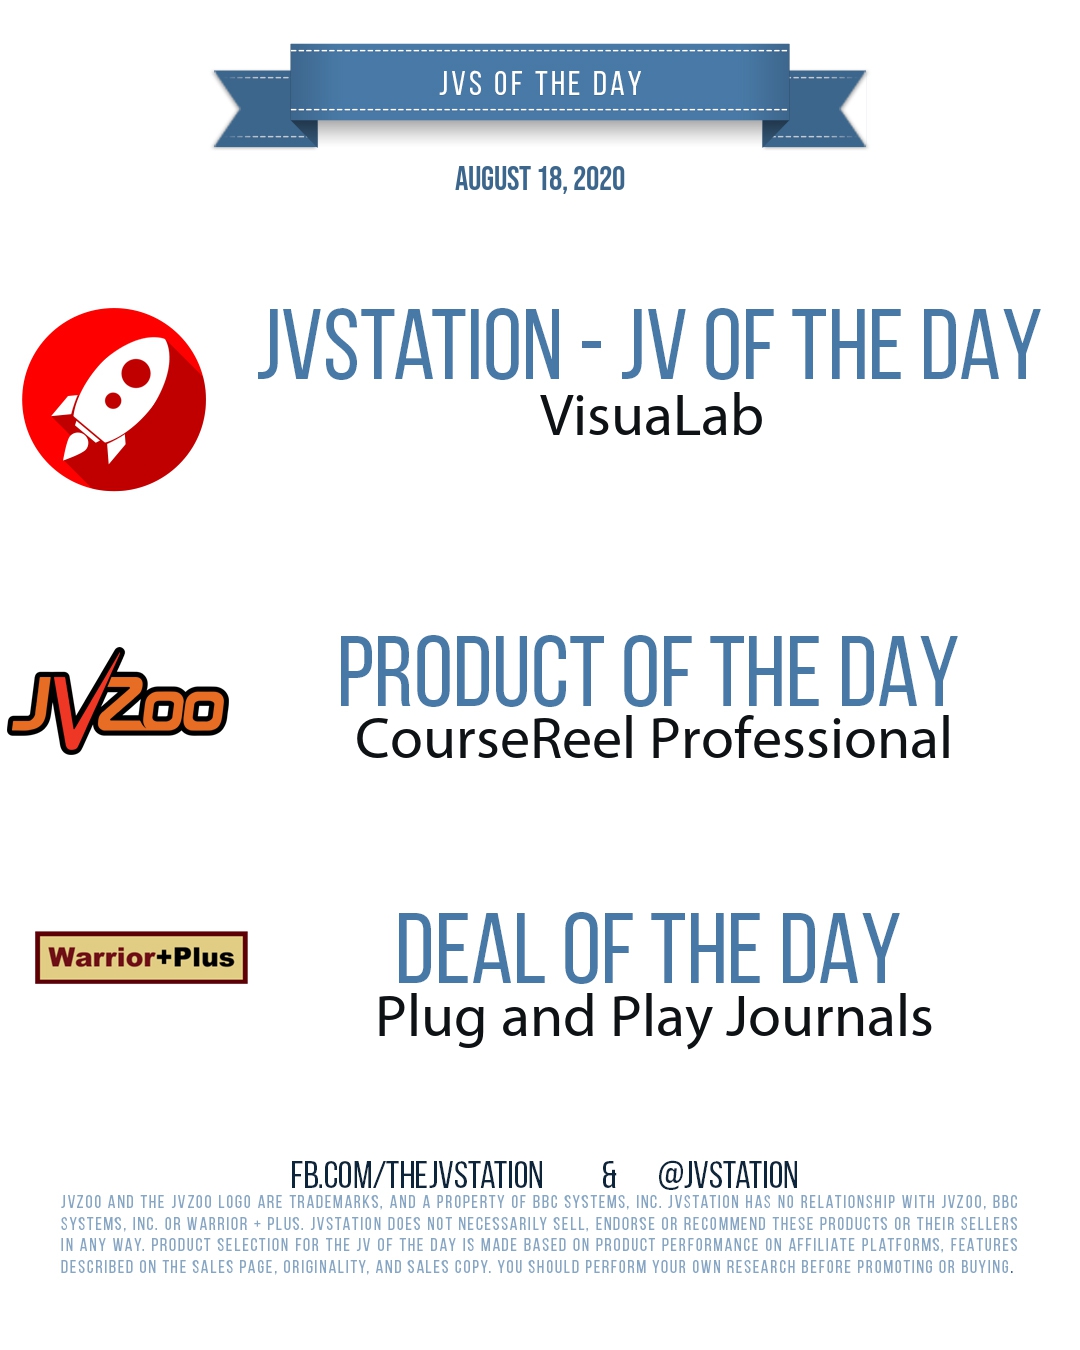 JVs of the day - August 18, 2020